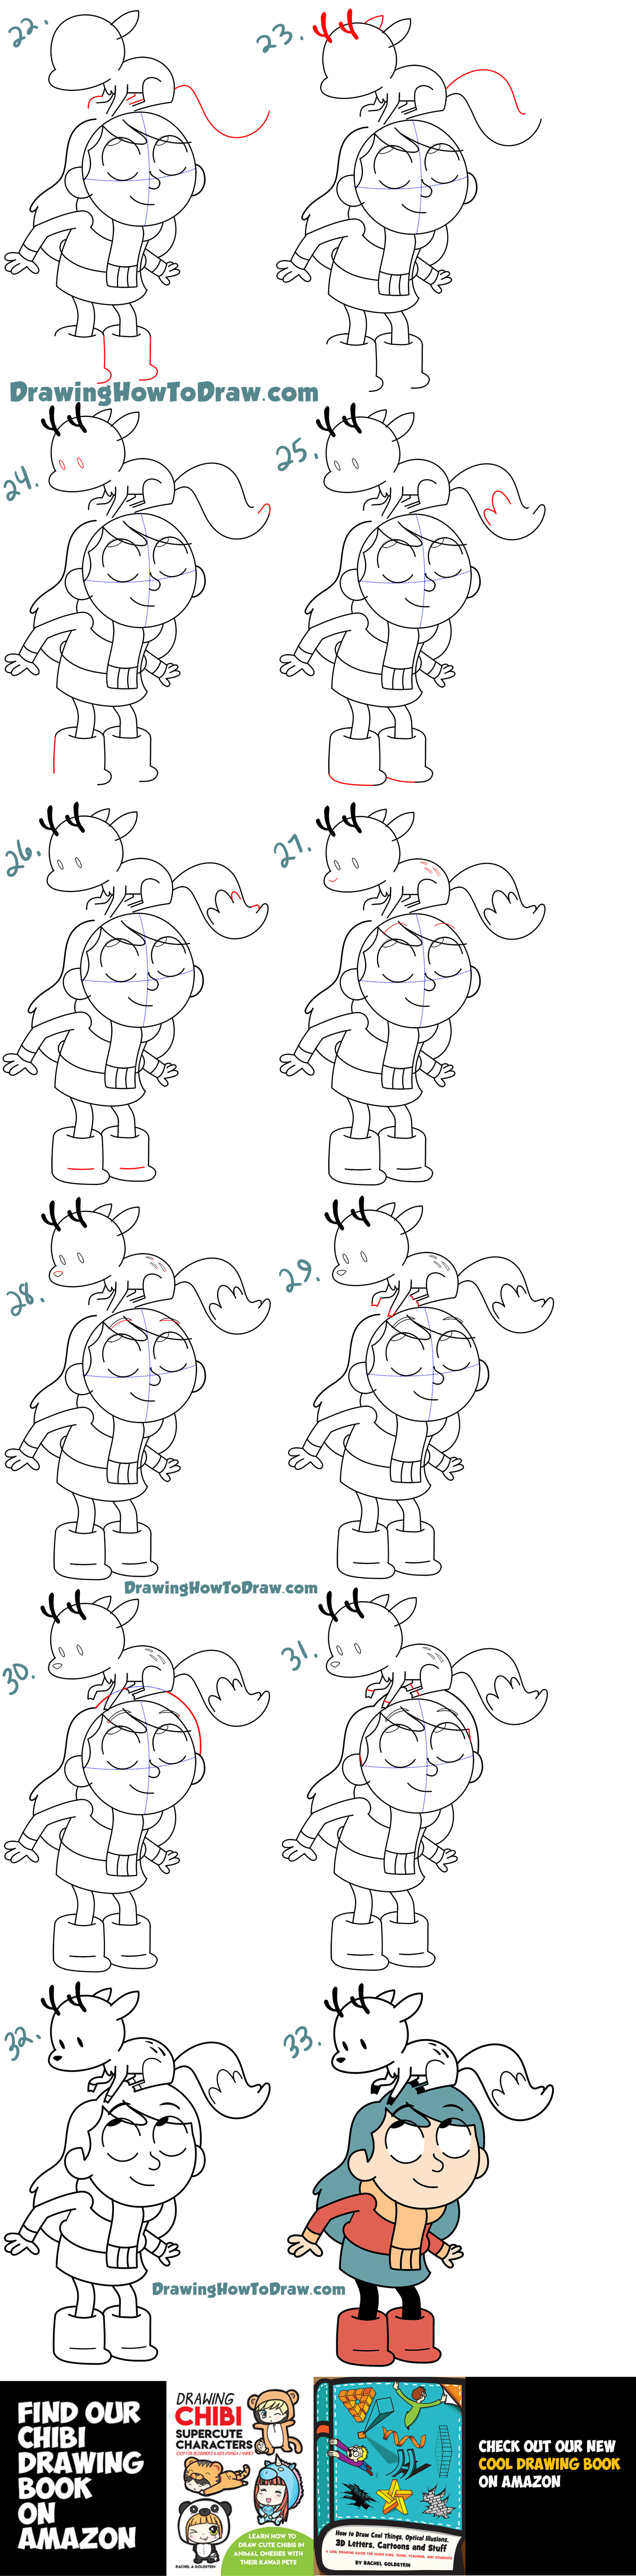 Learn How to Draw Hilda and Her Deer-Fox Easy Step by Step Drawing Tutorial for Kids & Beginners